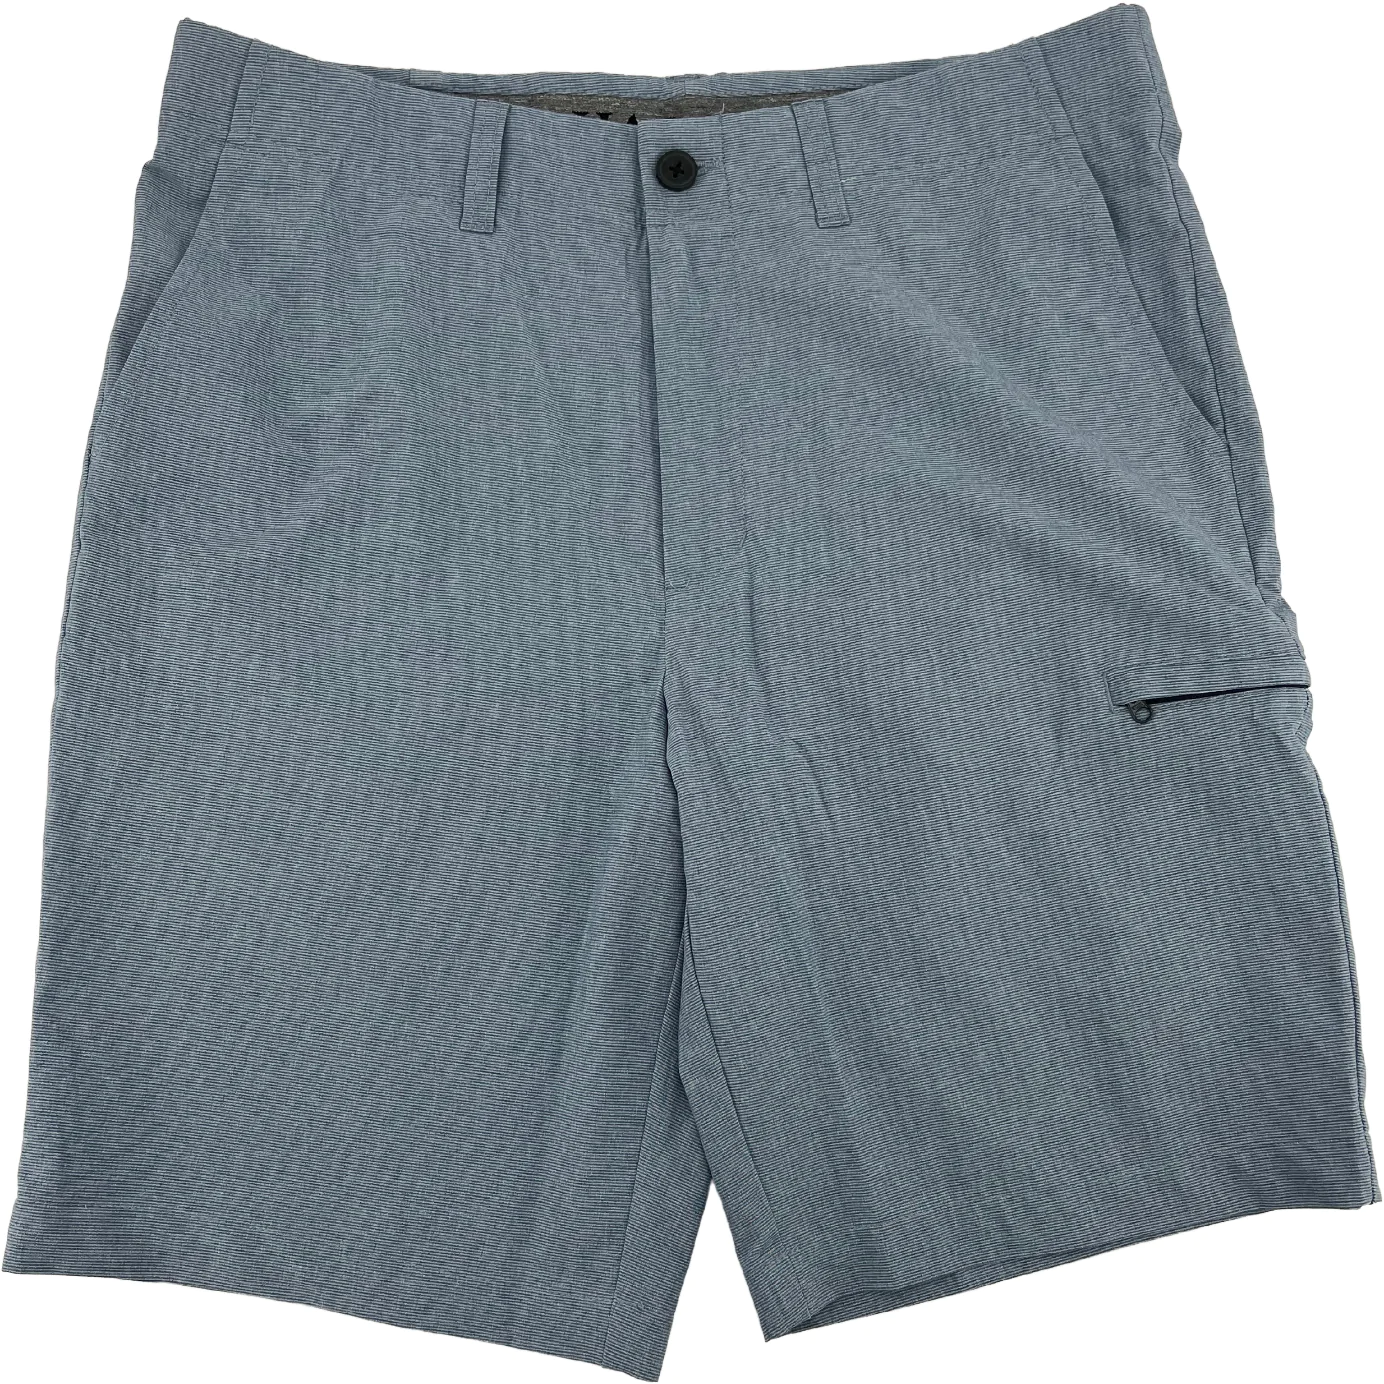 Haggar Men's Shorts / In Motion Style / Light Blue / Various Sizes